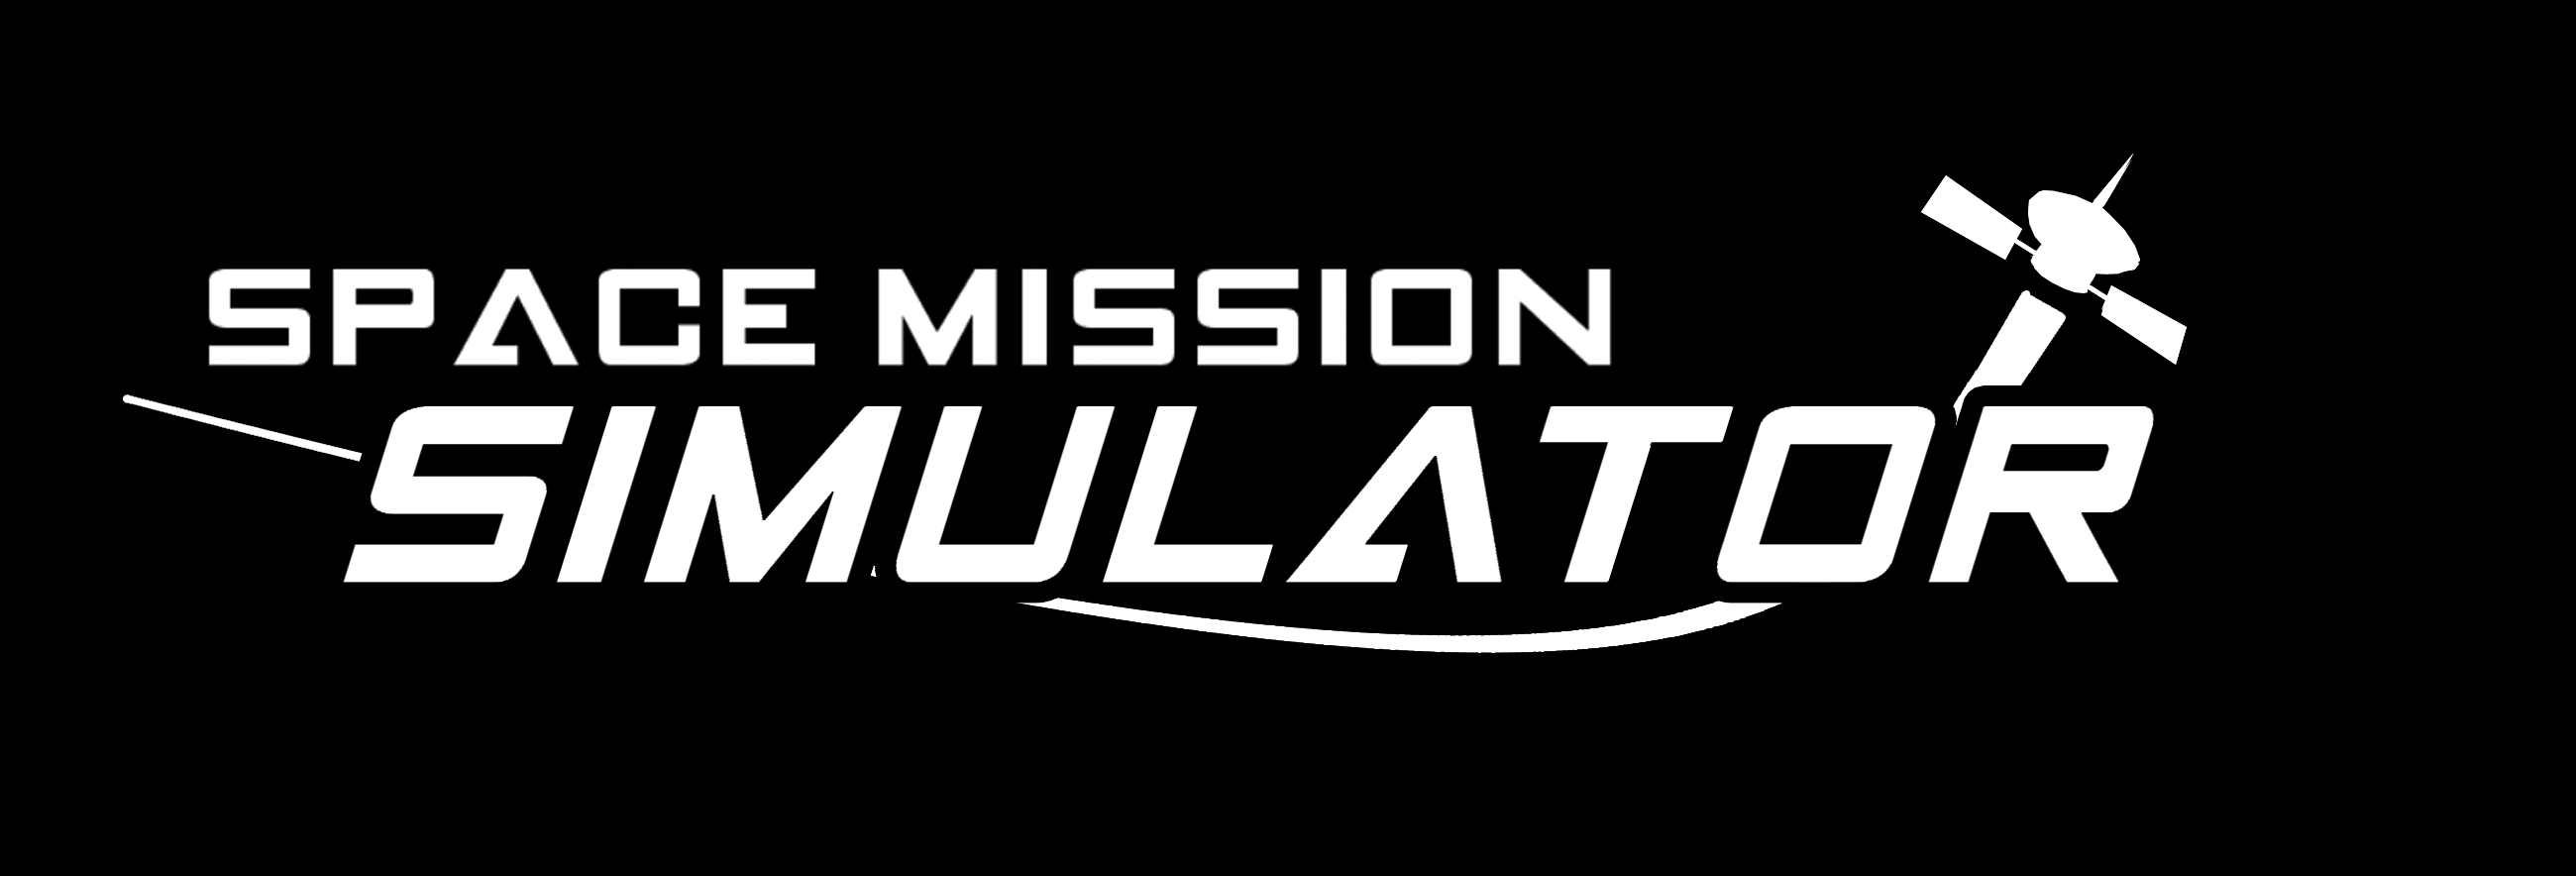 Public Mission - Blast Off Into 2023 @ Challenger Learning Center